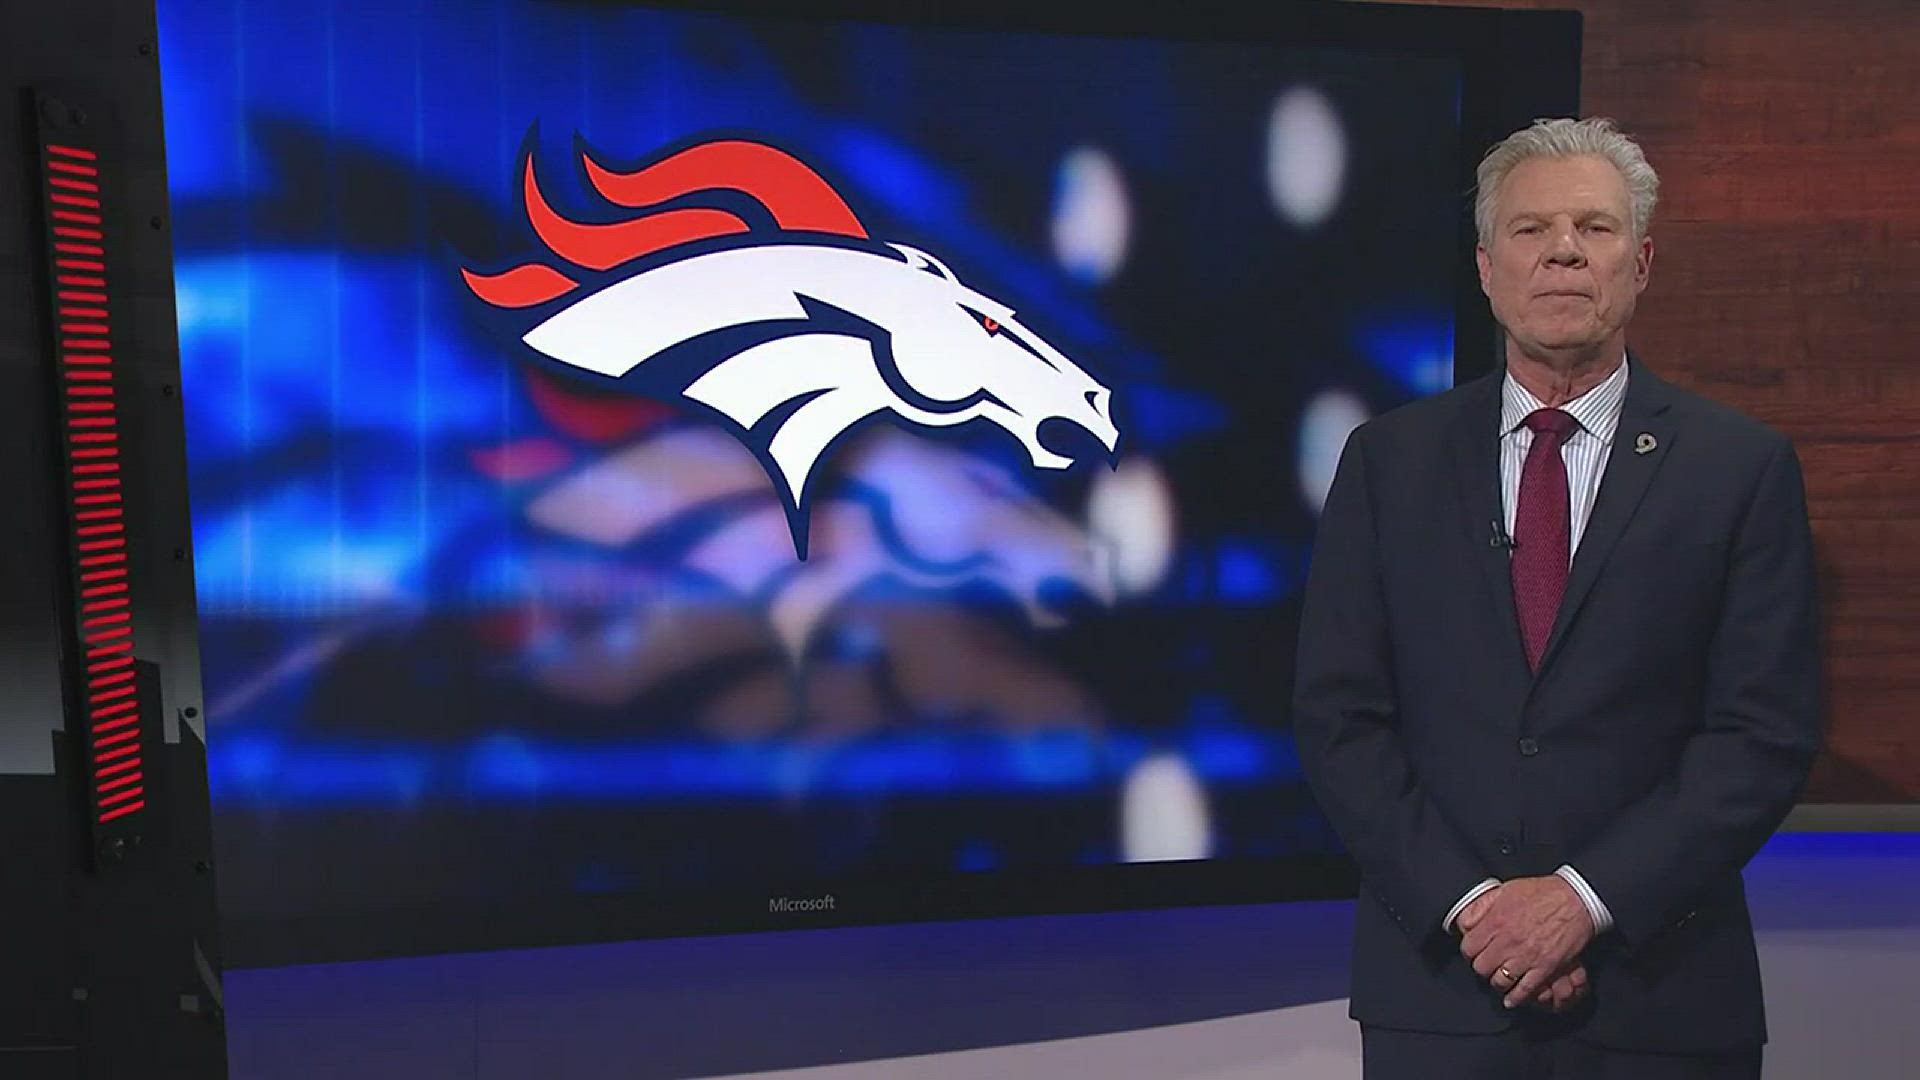 9NEWS Broncos Insider Mike Klis believes Denver should be about now and although they will need a young quarterback, they should take a player they could use elsewhere with the No. 10 pick.